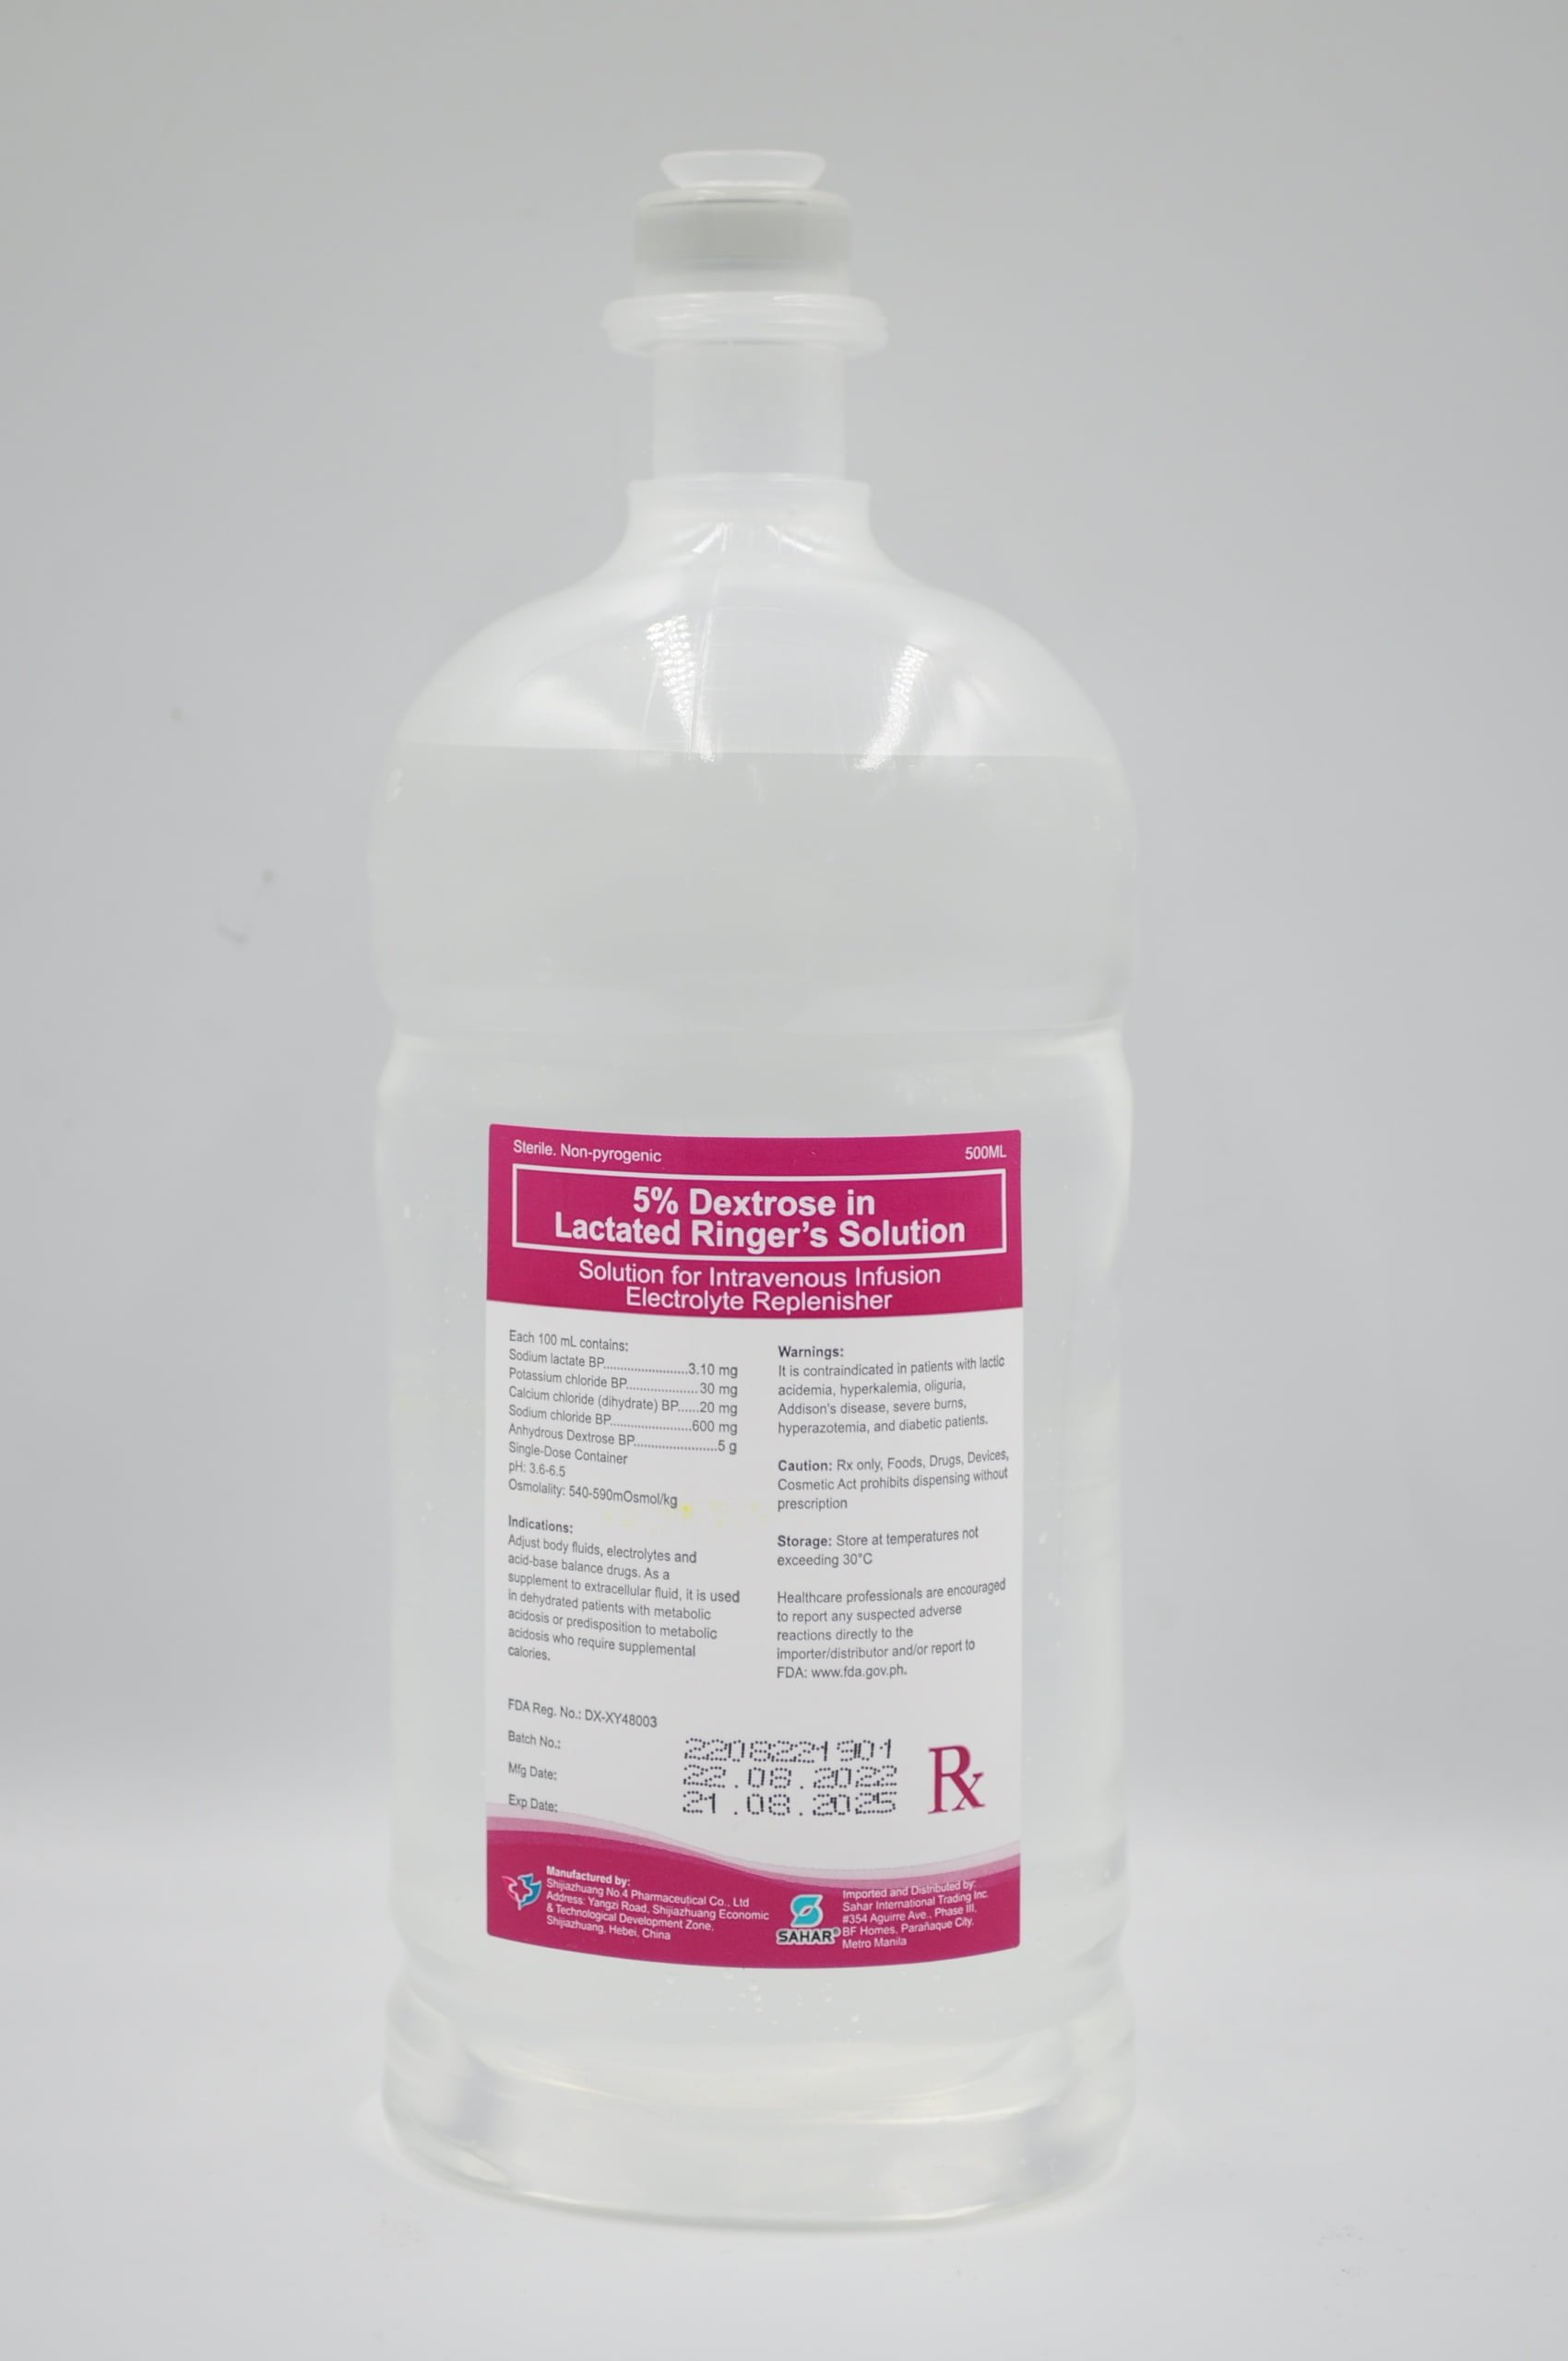 5% Dextrose in Lactated Ringer's Solution